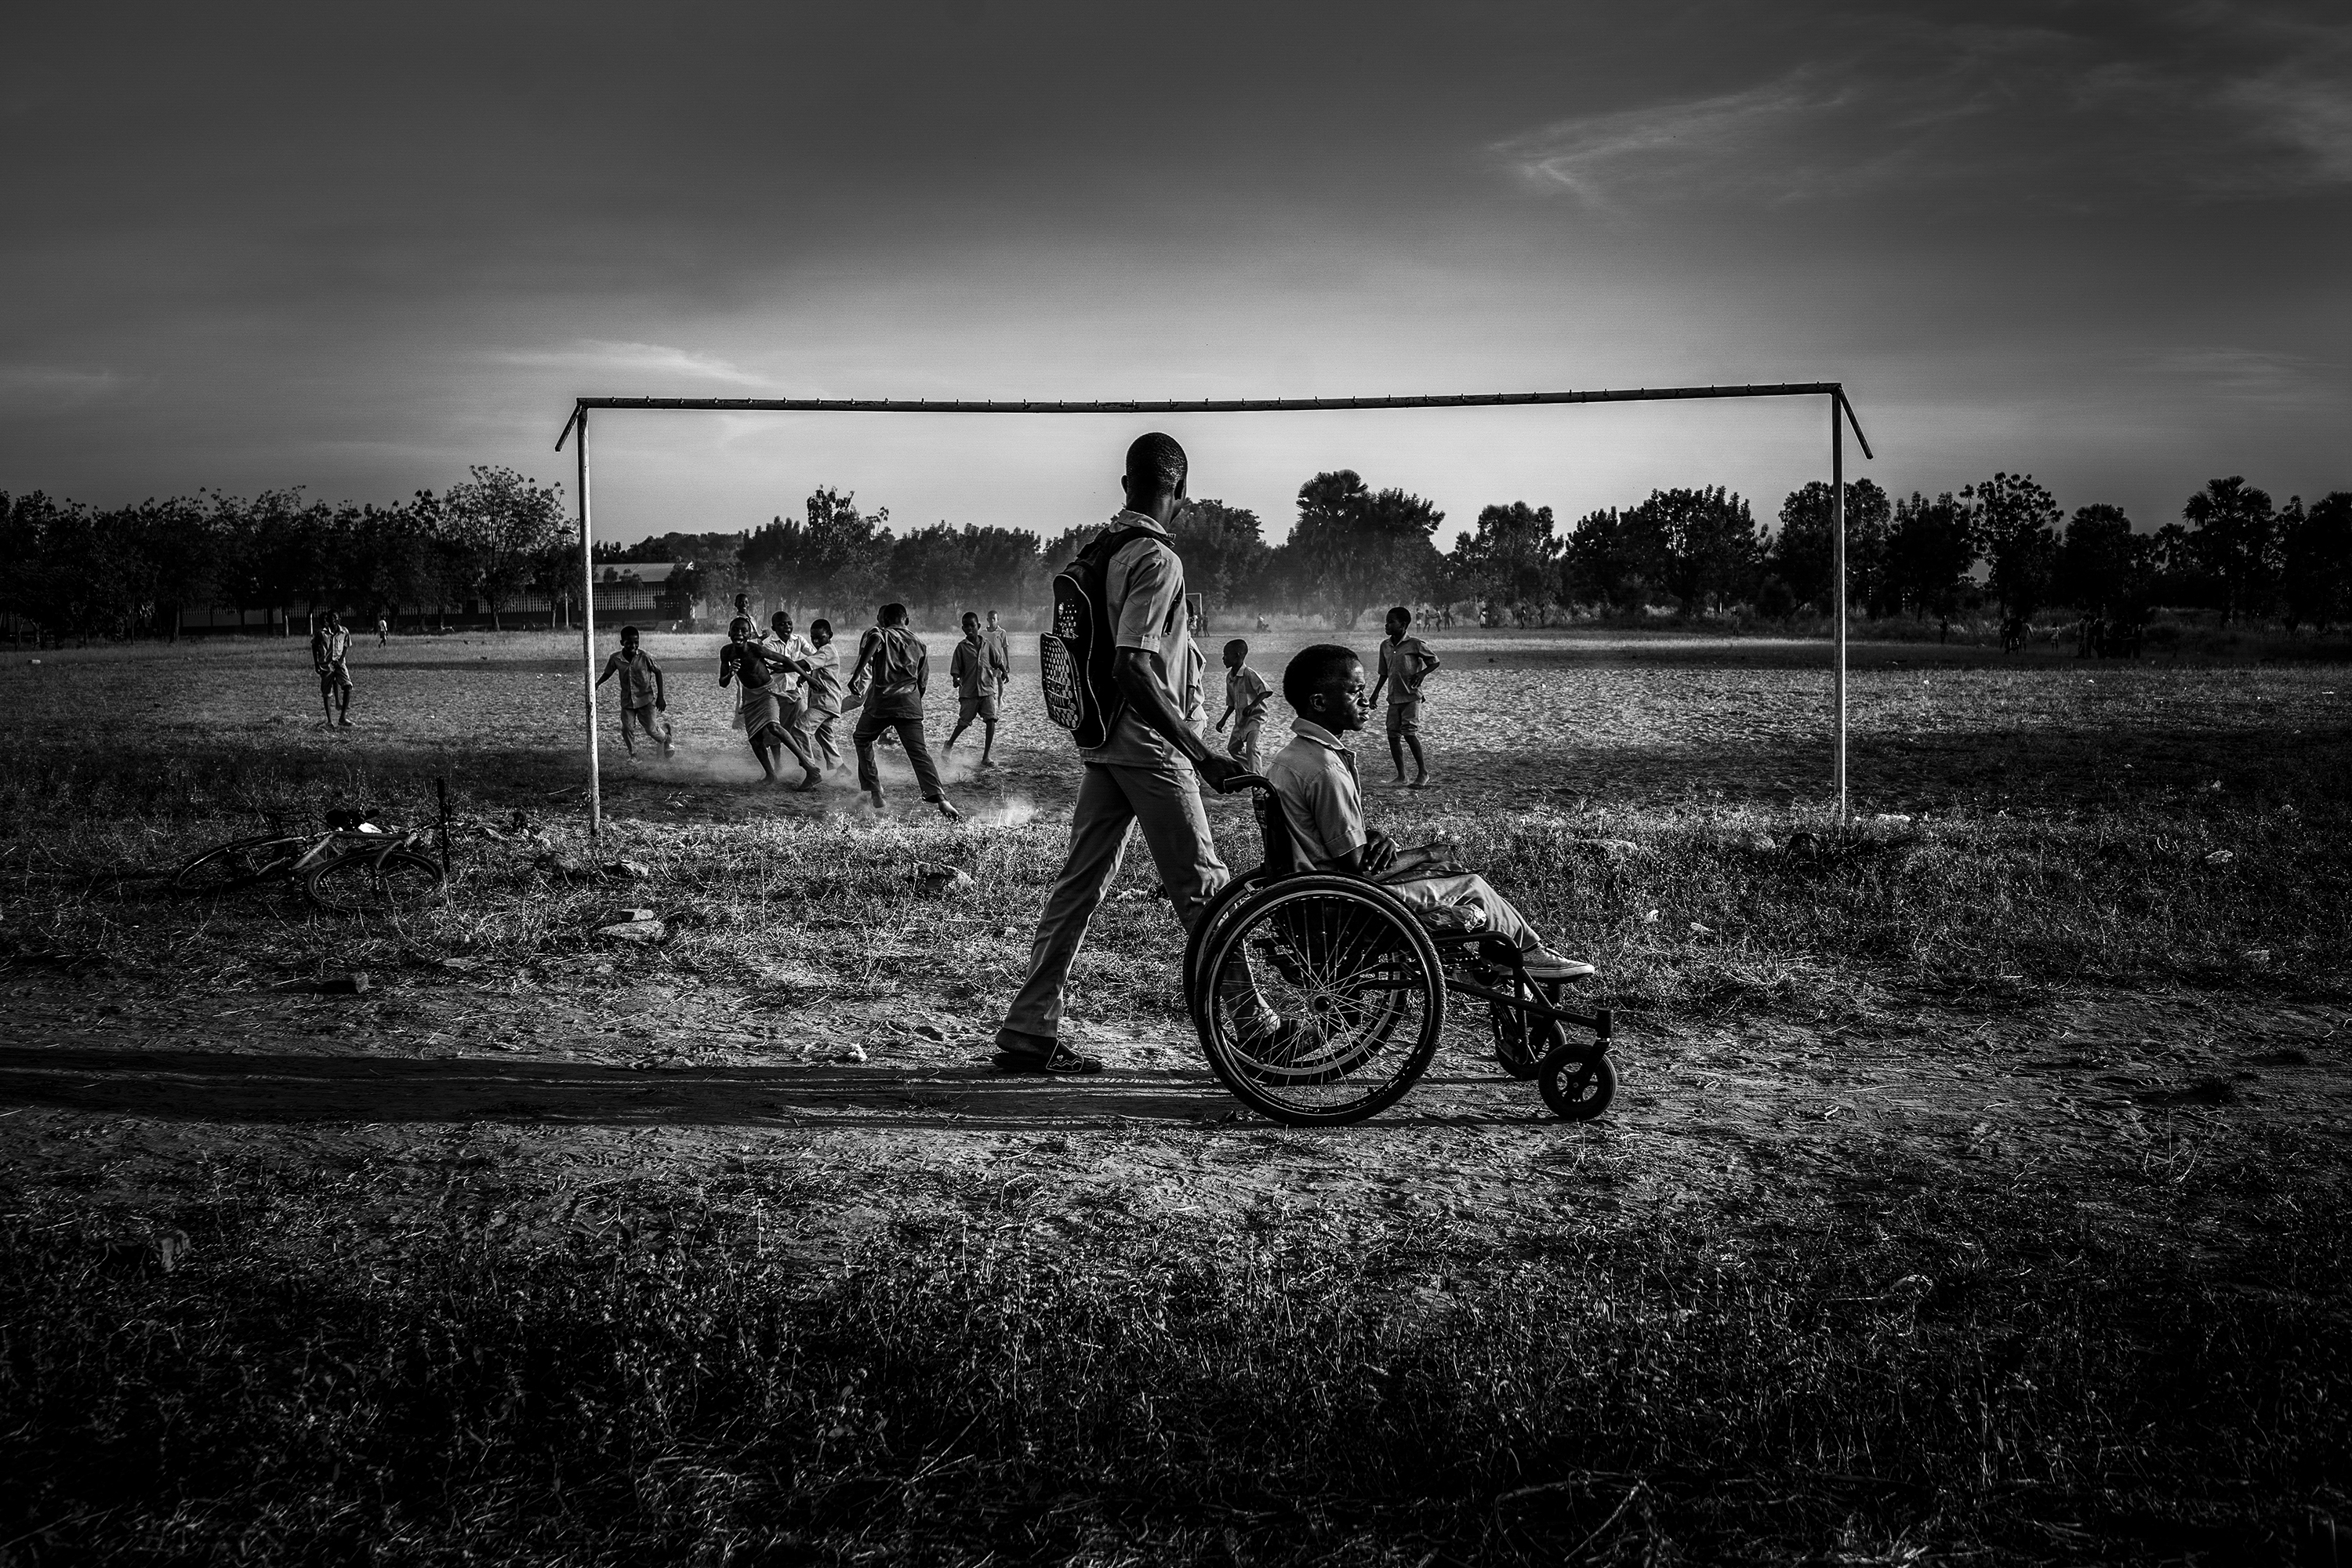 A child eing pushed in a wheelchair against a backdrop of others playing football